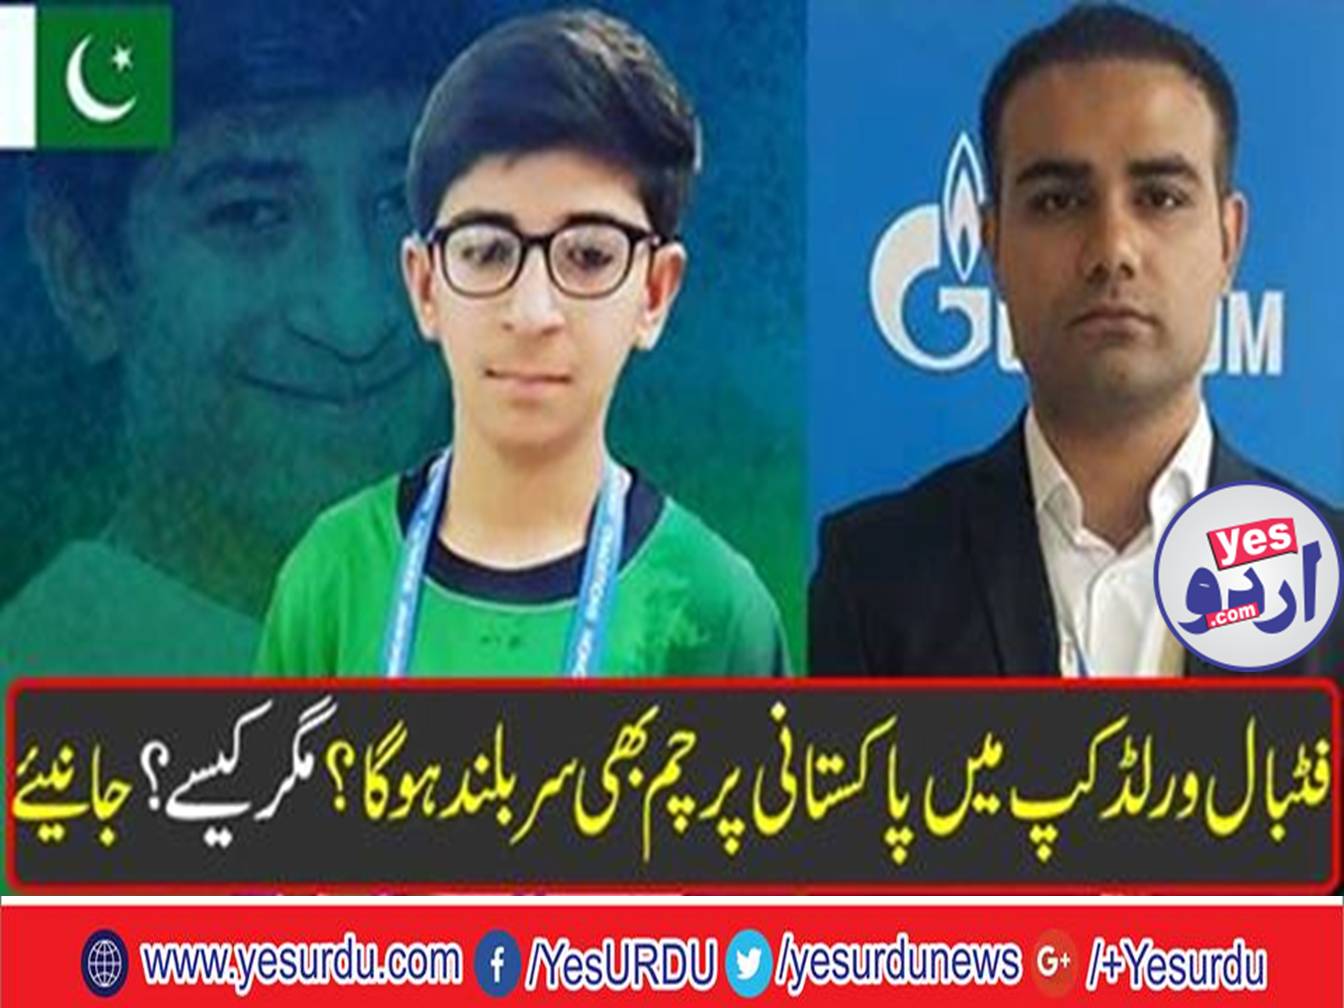 Young Pakistani ambassador Sarang hoot Baloch will represent the country by raising Pakistani flag in the opening ceremony of the FIFA World Cup 2018 in Moscow